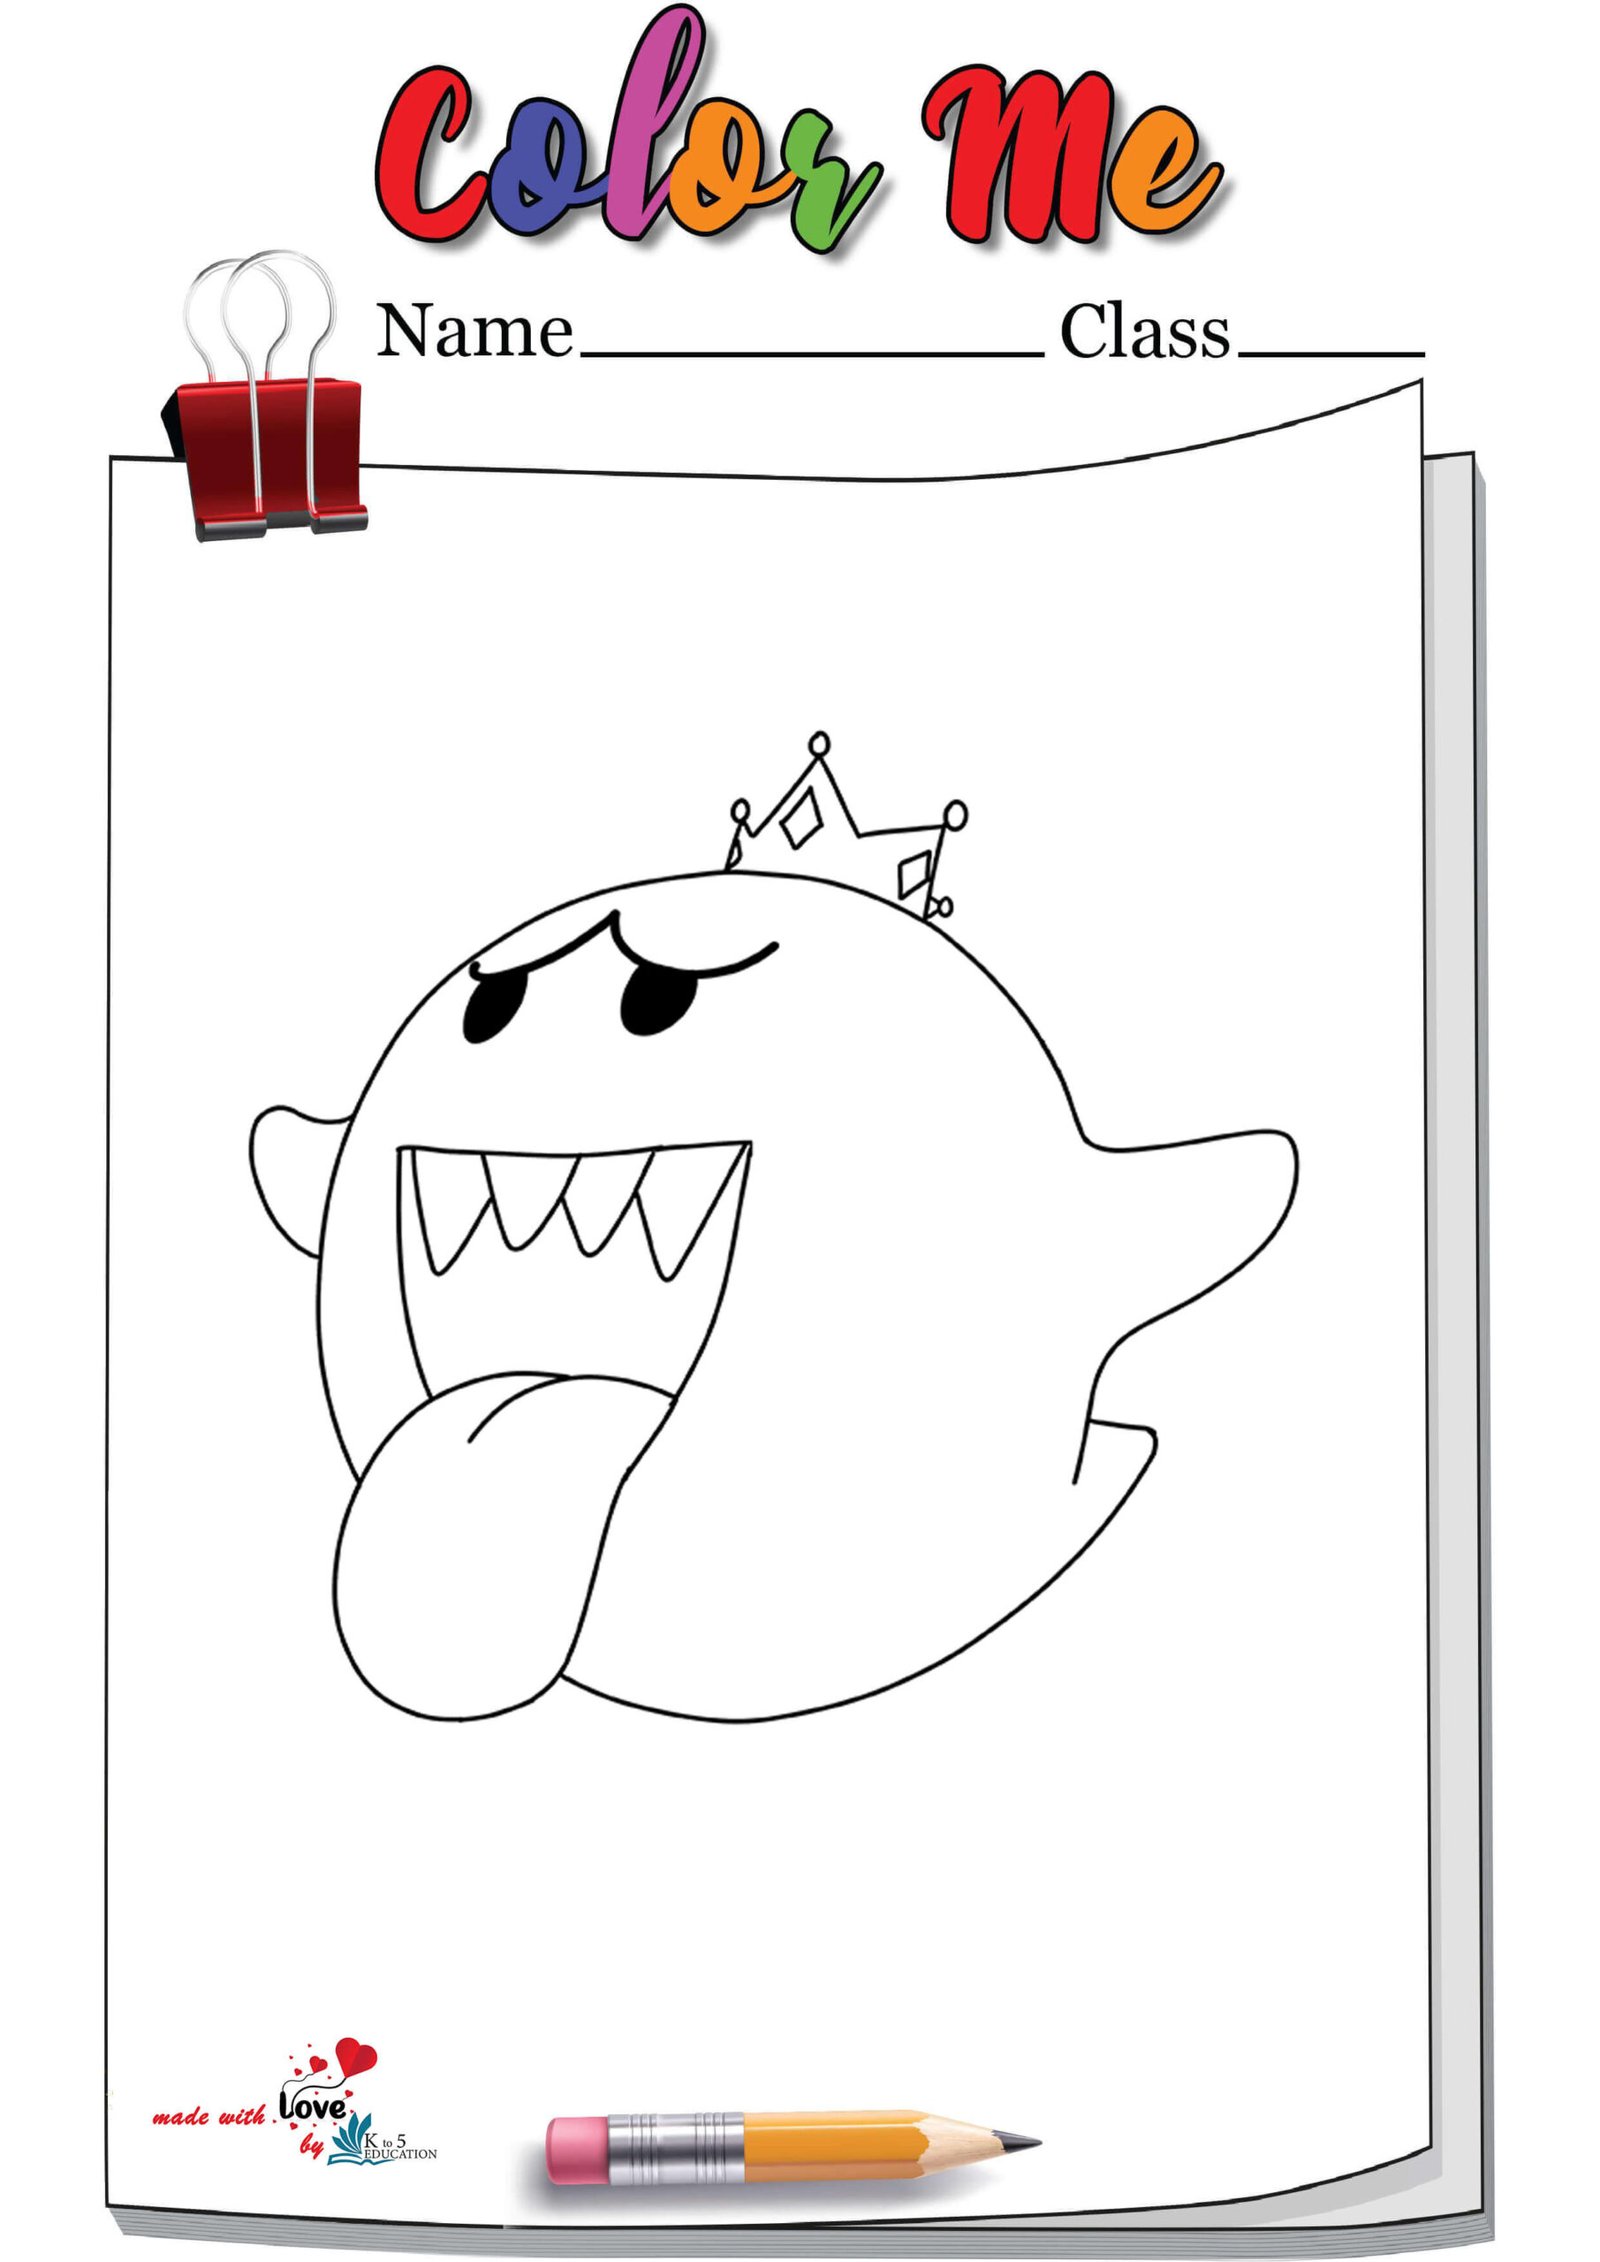 King Boo Coloring Page